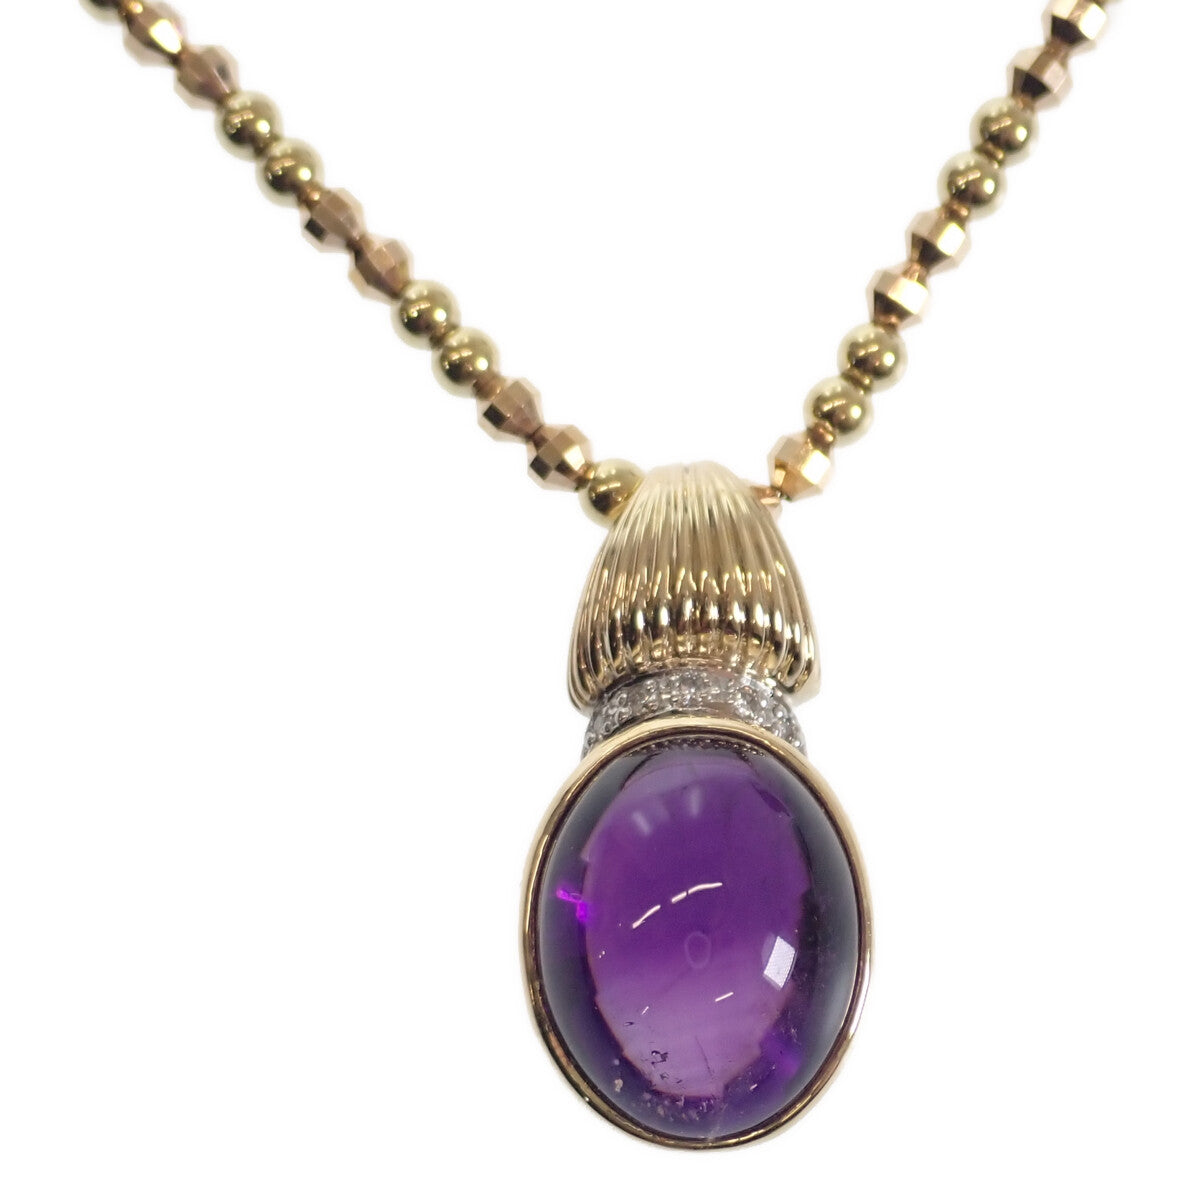 Ladies' K18YG and Pt900 Necklace with Amethyst (12.89ct) and Diamond (0.05ct) in Gold – Used